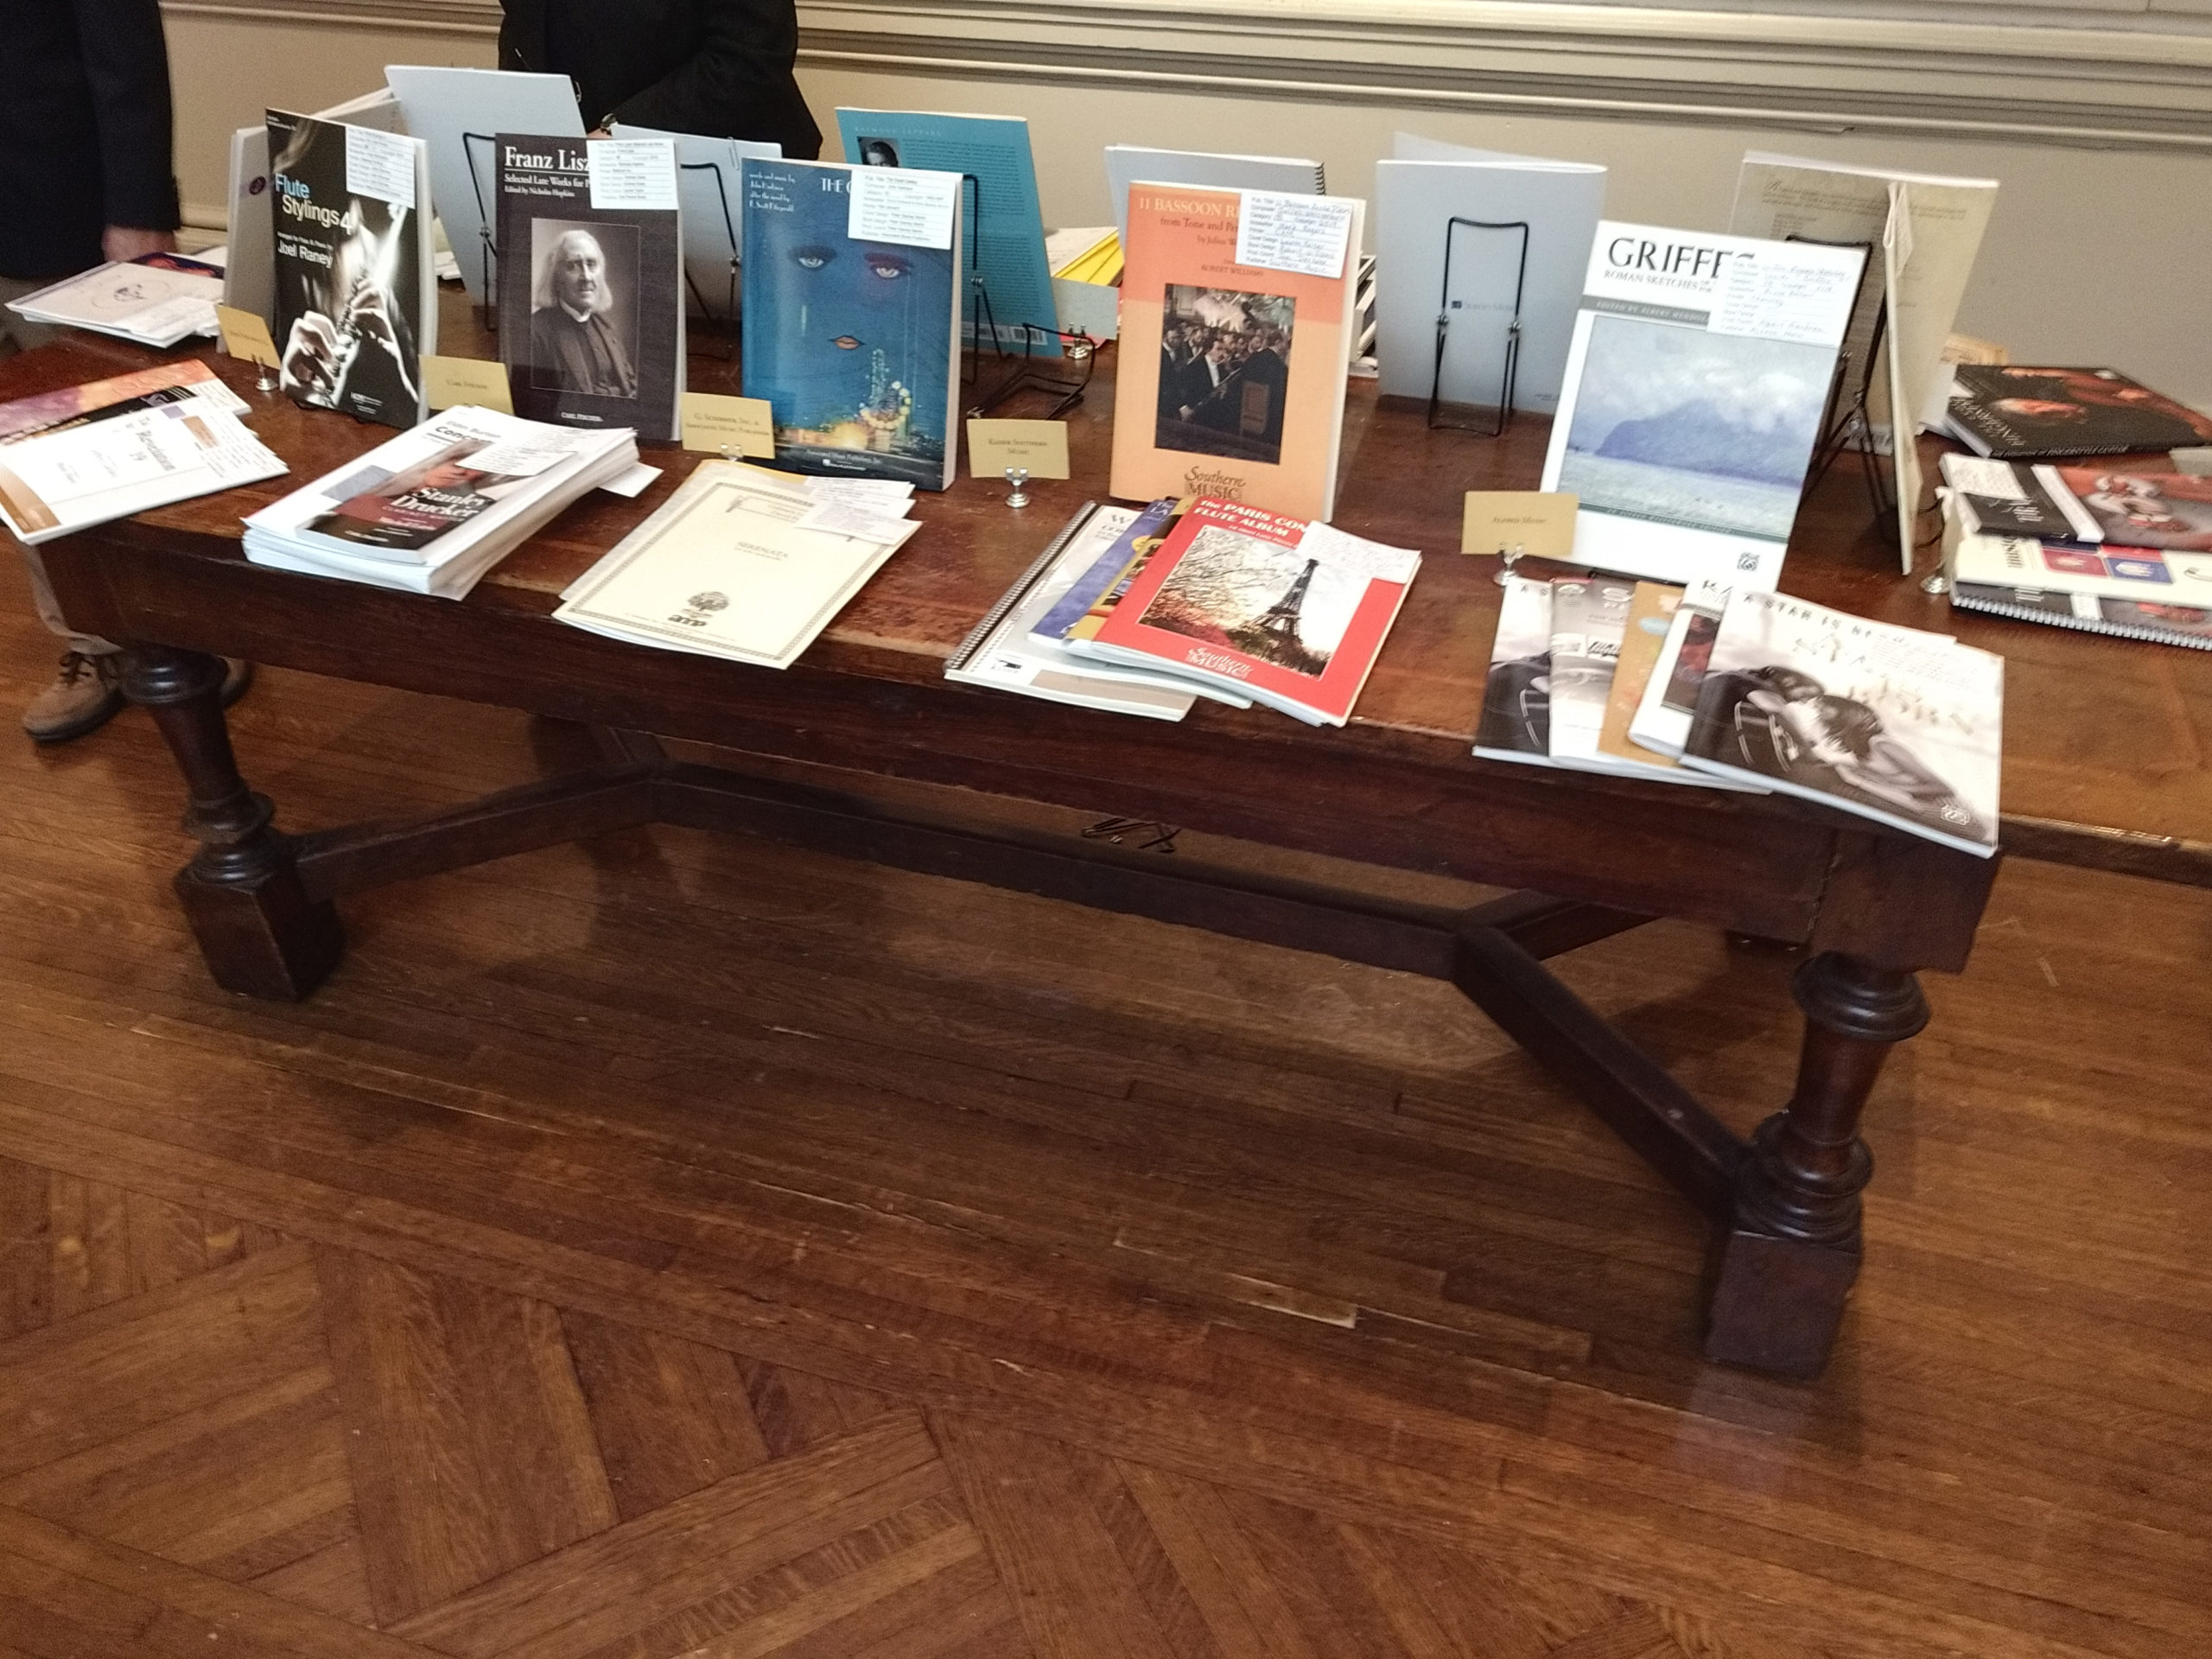 A brown wooden table that has stacks of publications on it